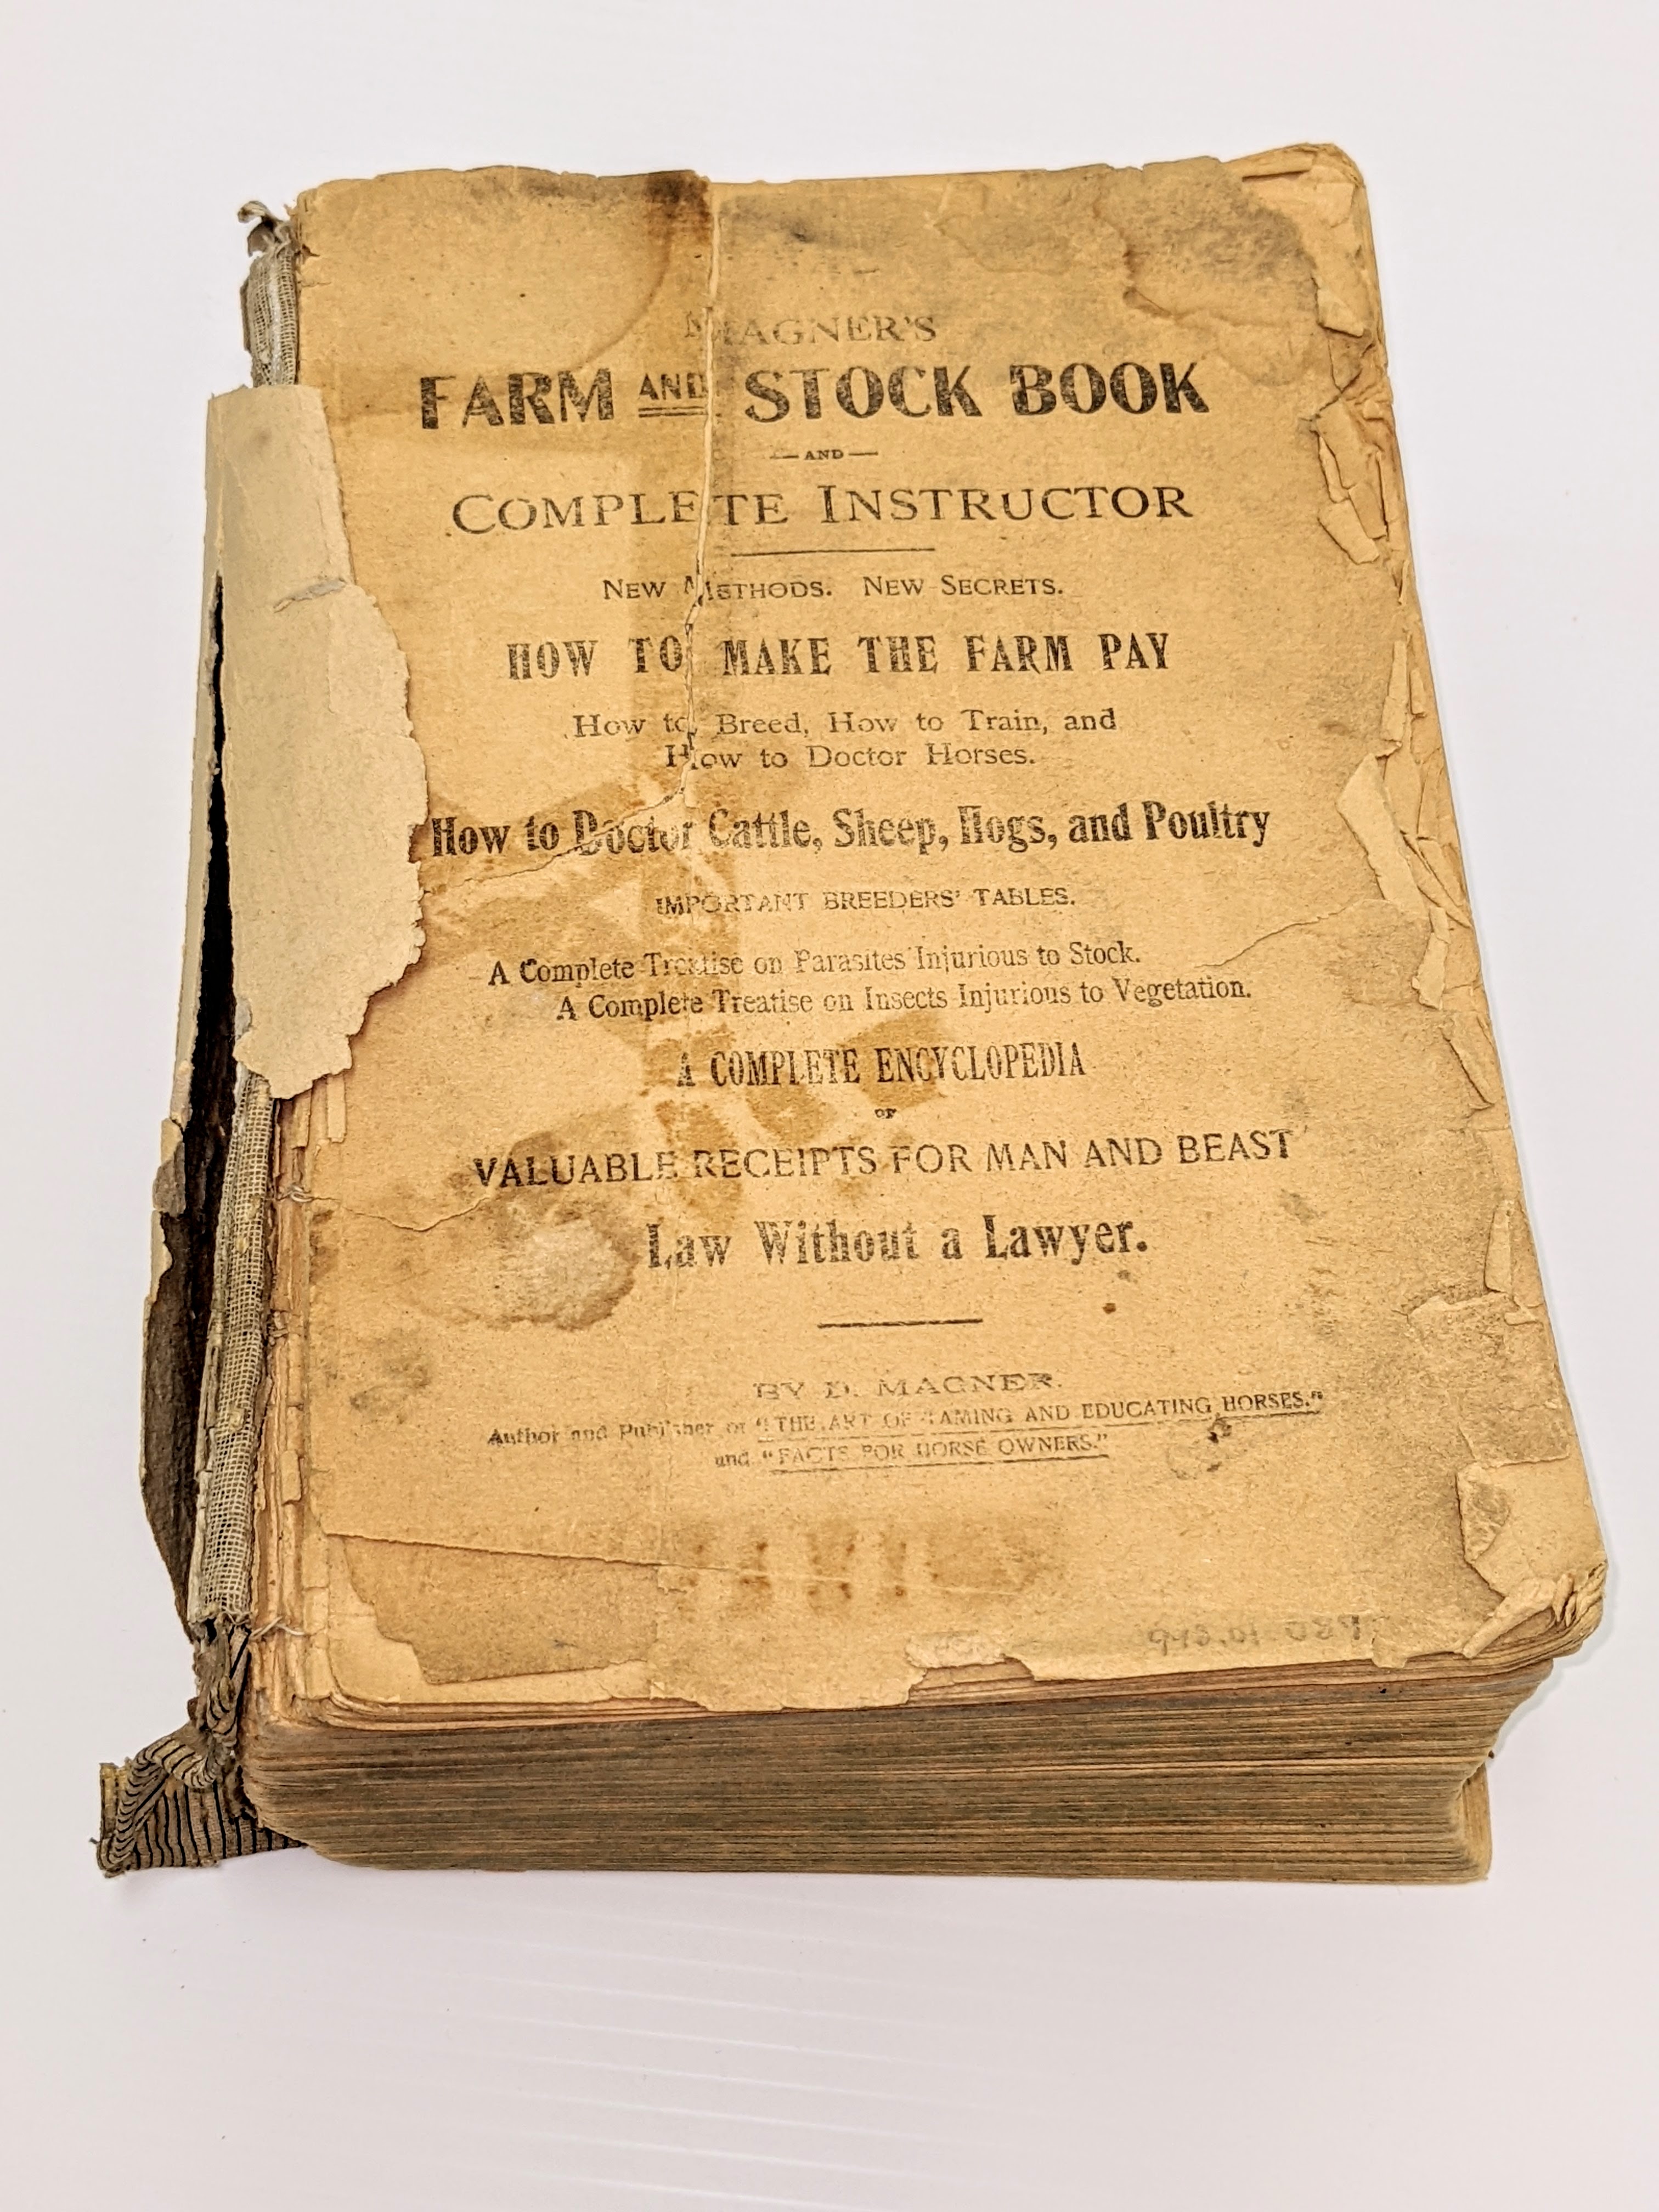 Published in 1906 this "Magners Farm and Stock book" was a one stop resource for learning "how to make the farm pay". The inside page pictured shows details of the topics covered within it's thick binding. The book belongs to the Newman Jack + Pearl collection and is well used and quite fragile- which makes sense considering relations of the family have been farming in the area since 1924!
09/05/2022
998.1.89 / Newman Jack + Pearl